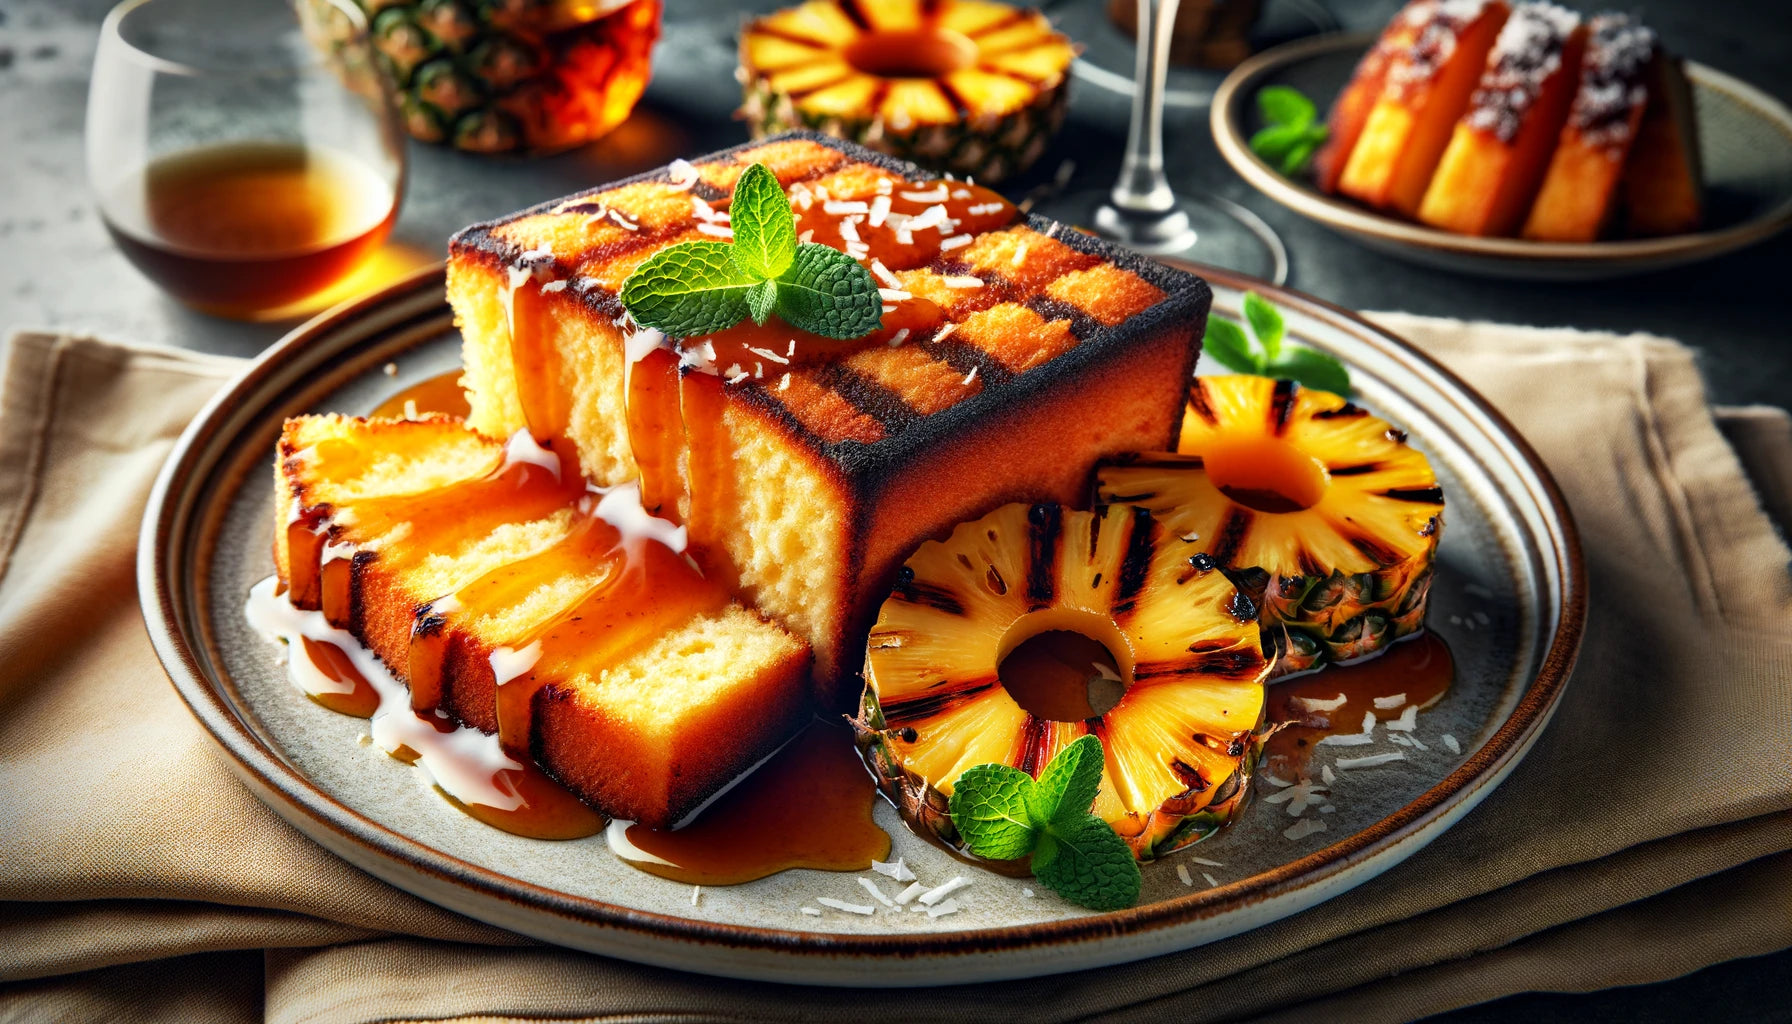 Grilled Poundcake & Pineapple with Rum Caramel Sauce | Arteflame Grill Desserts